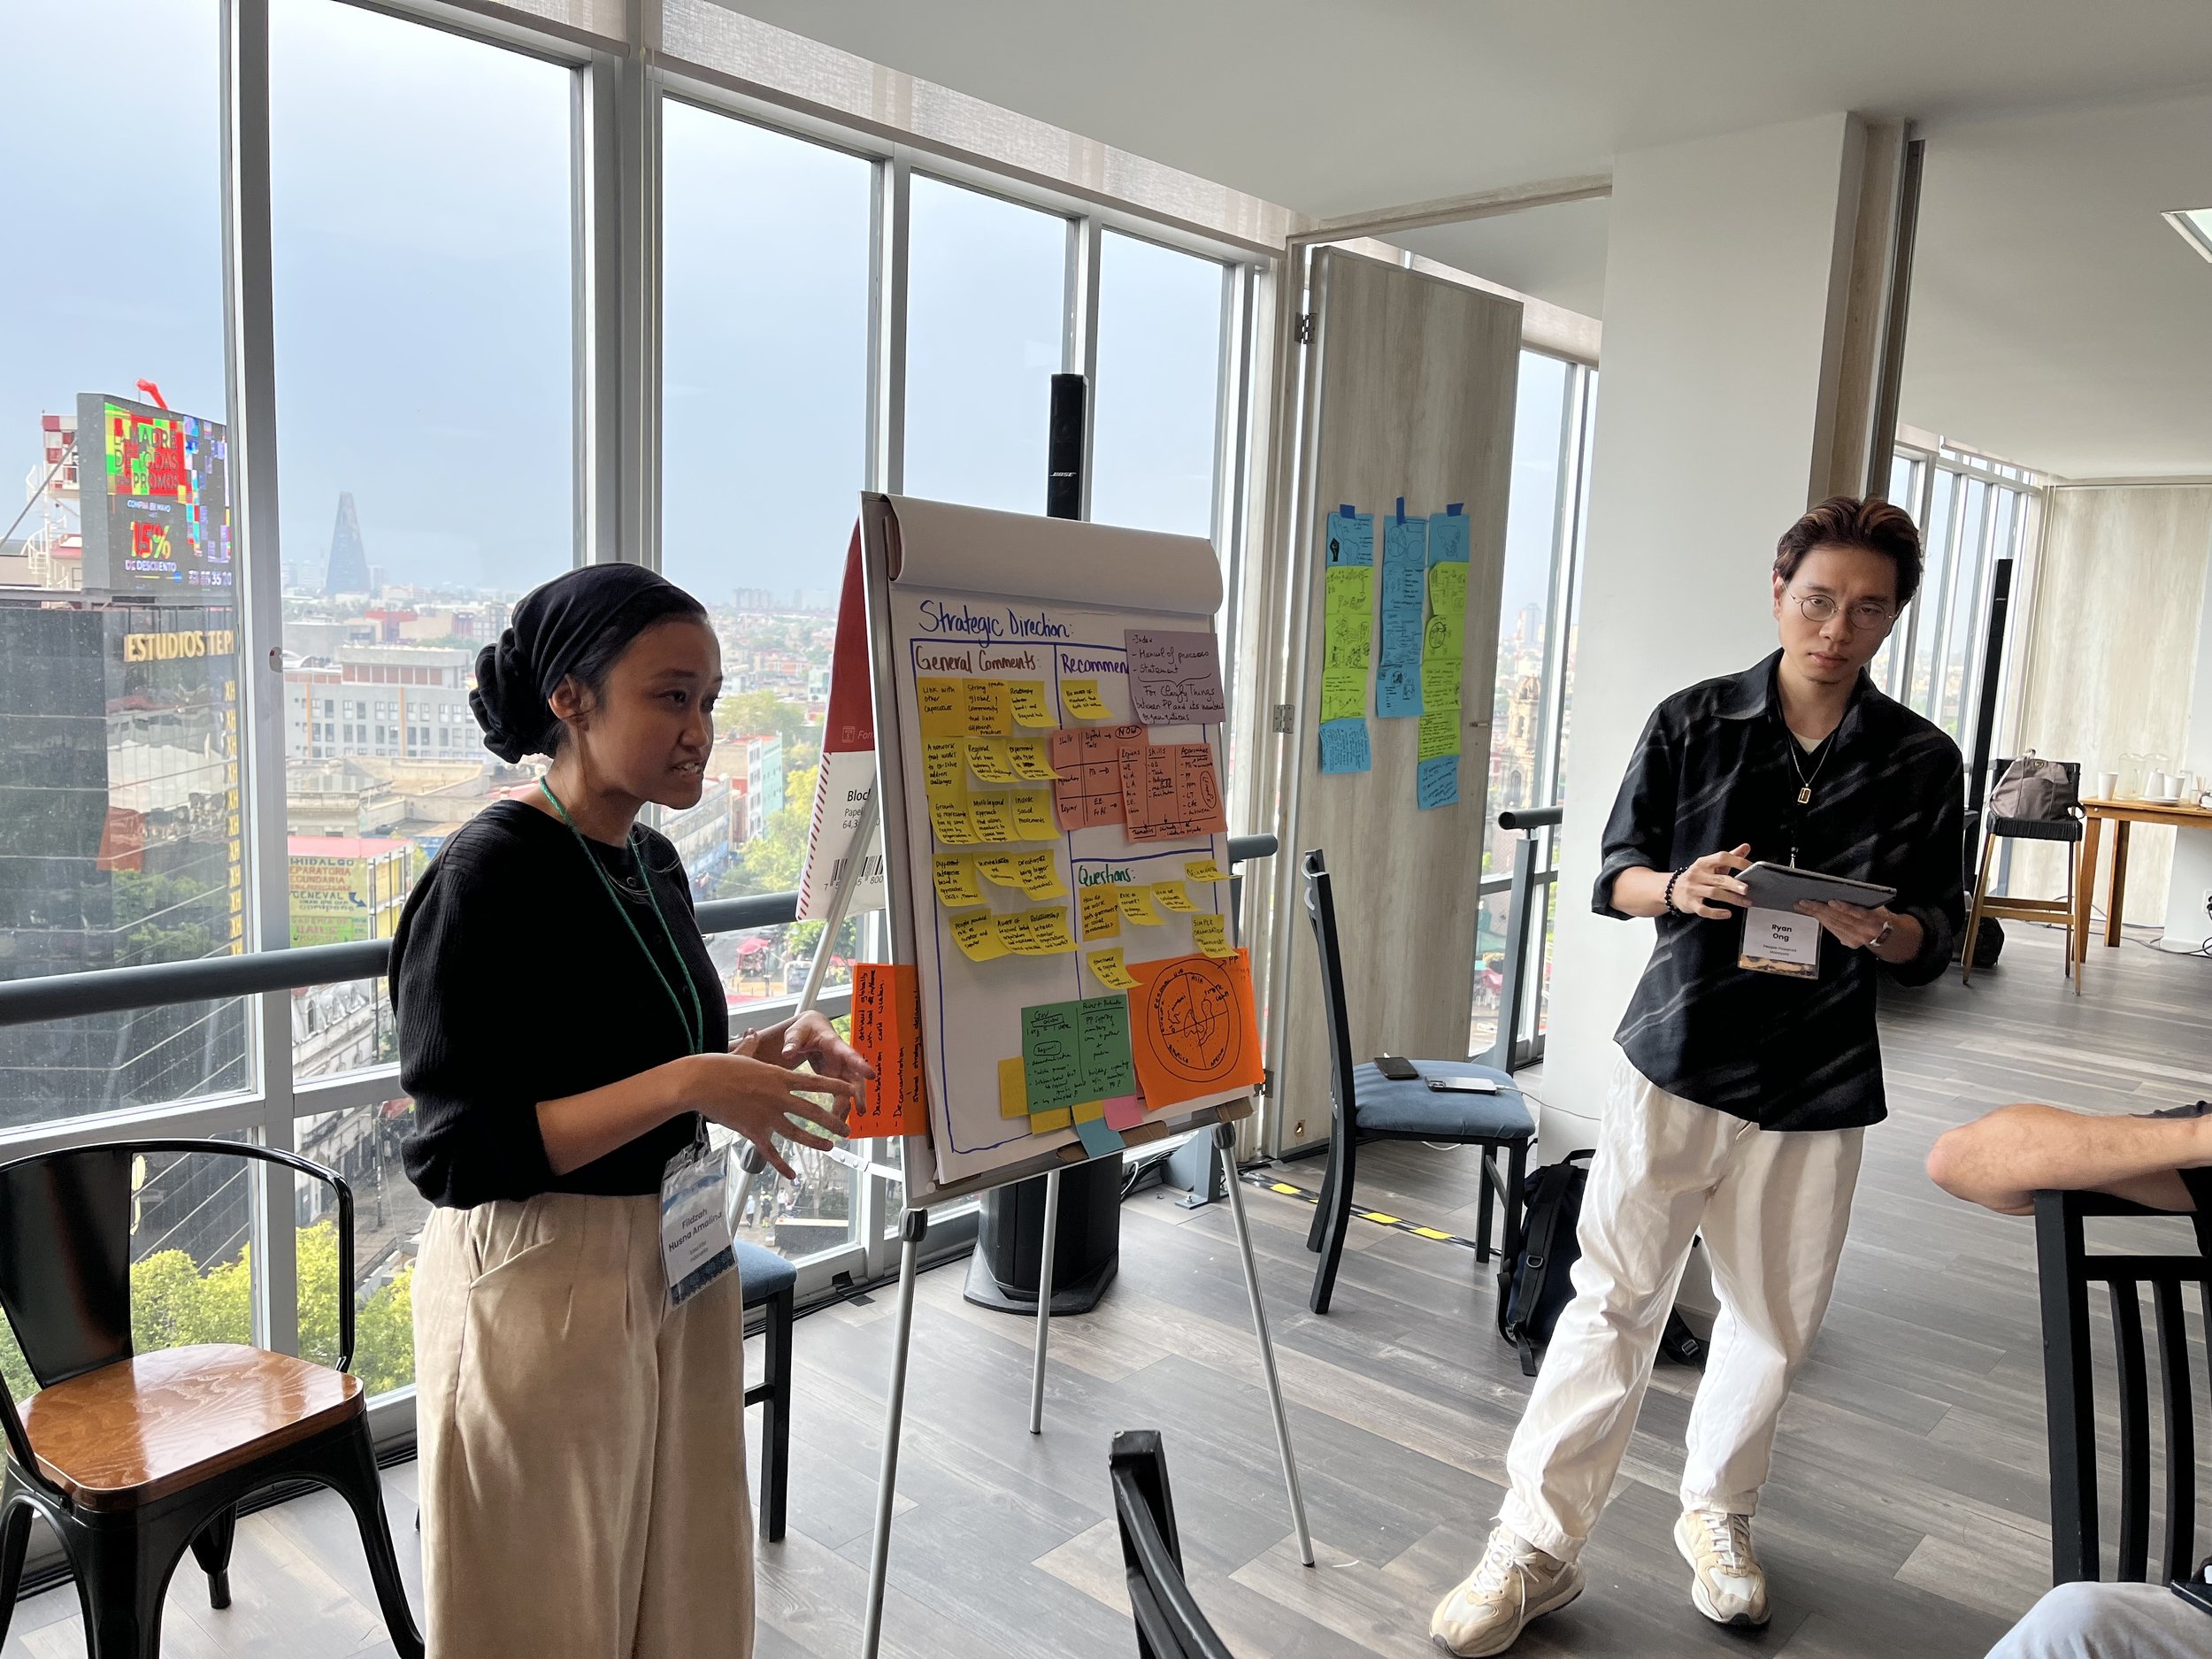   Fildzah Husna from Kota Kita in Indonesia (left) facilitates a strategic-planning discussion with the new People Powered communications coordinator, Ryan Ong (based in Malaysia).   